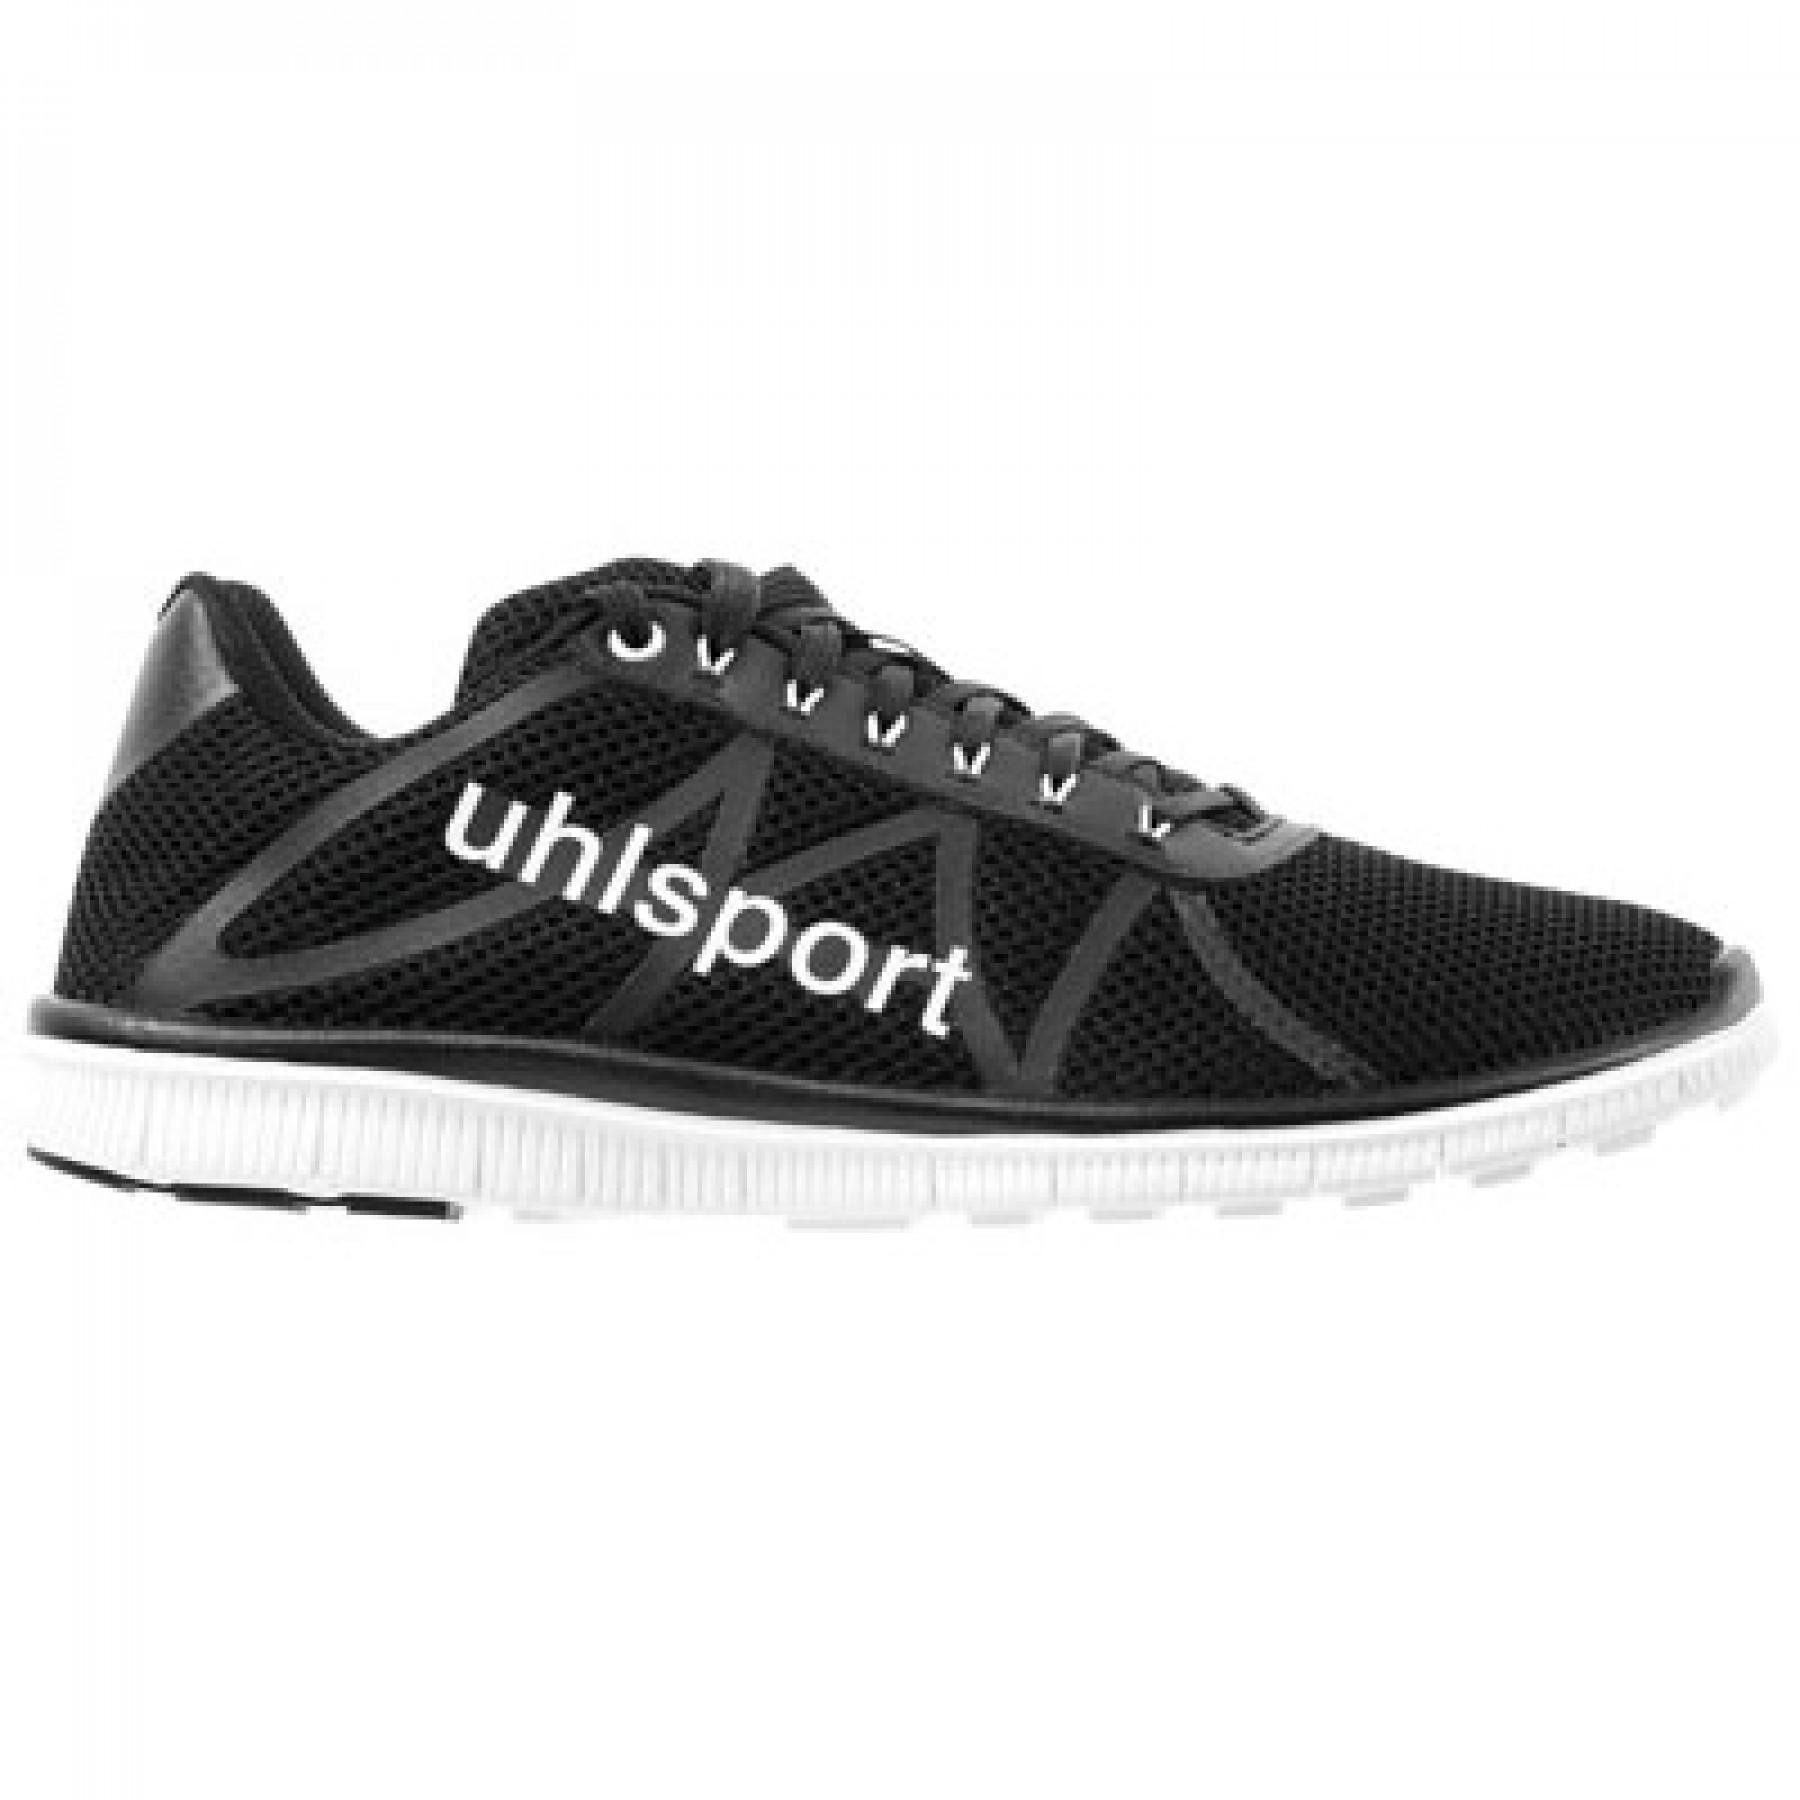 Details about   Uhlsport Float Mens Sports Casual Lace Up Shoes Trainers Sneakers White 